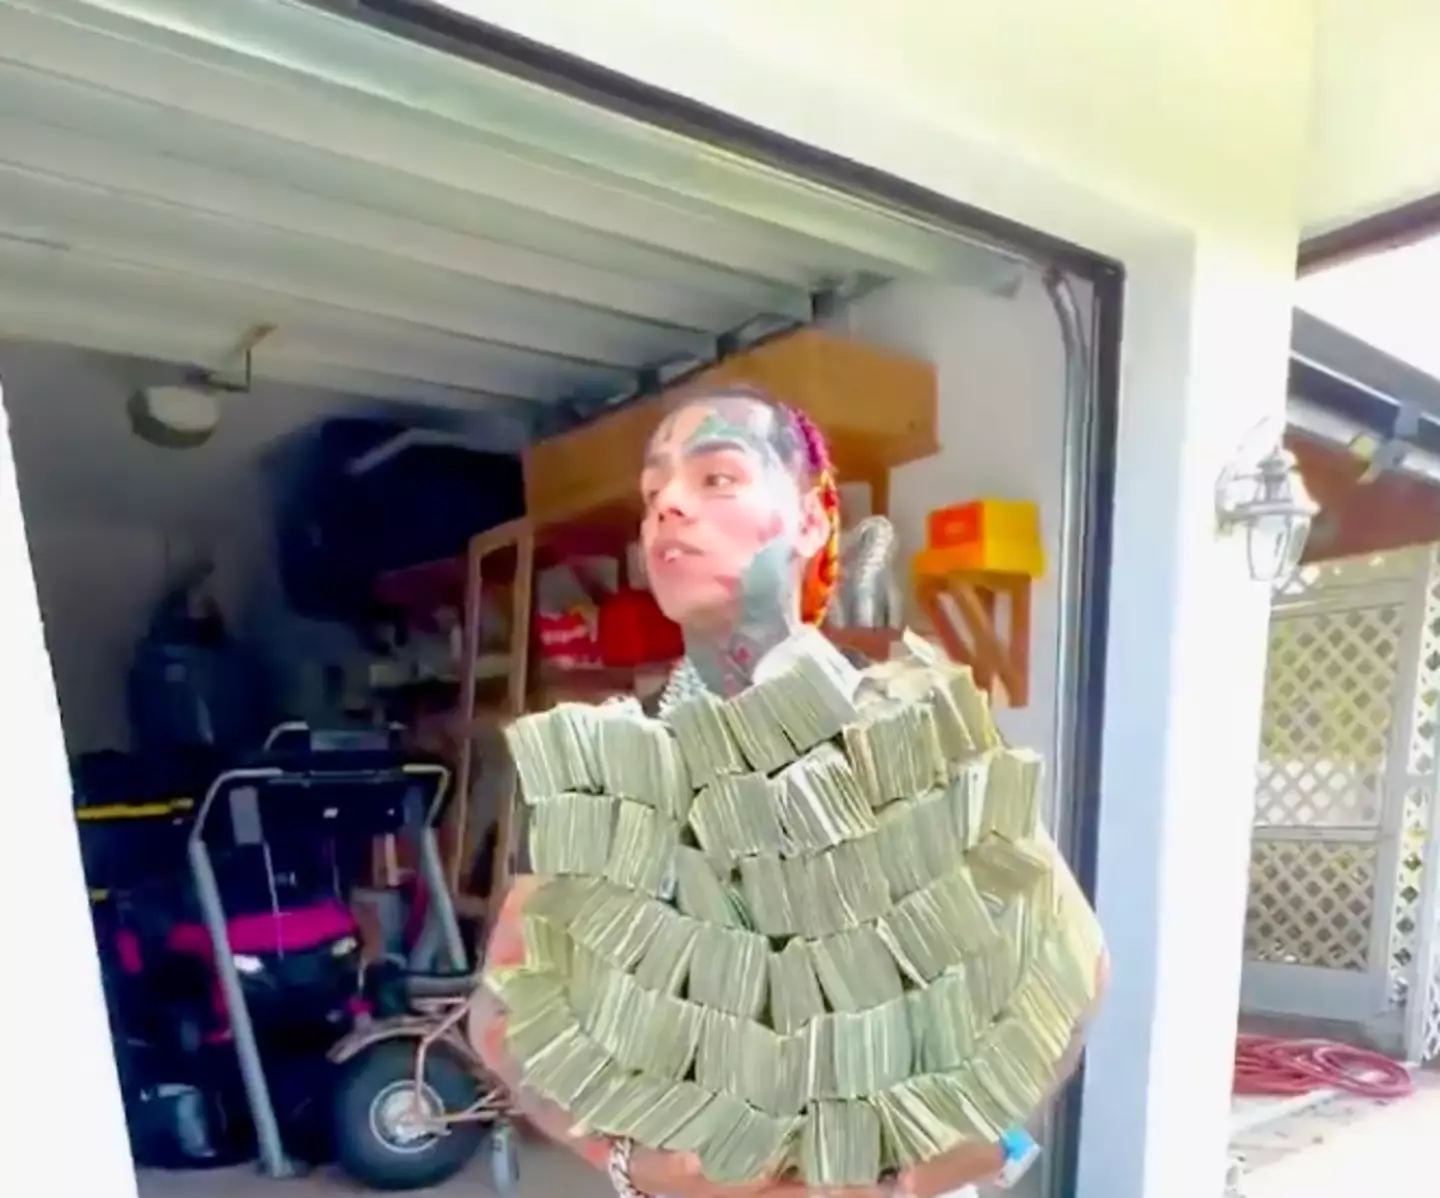 6ix9ine posts an Instagram in response to those who hate on him because of his wealth by showing them his wads of cash.